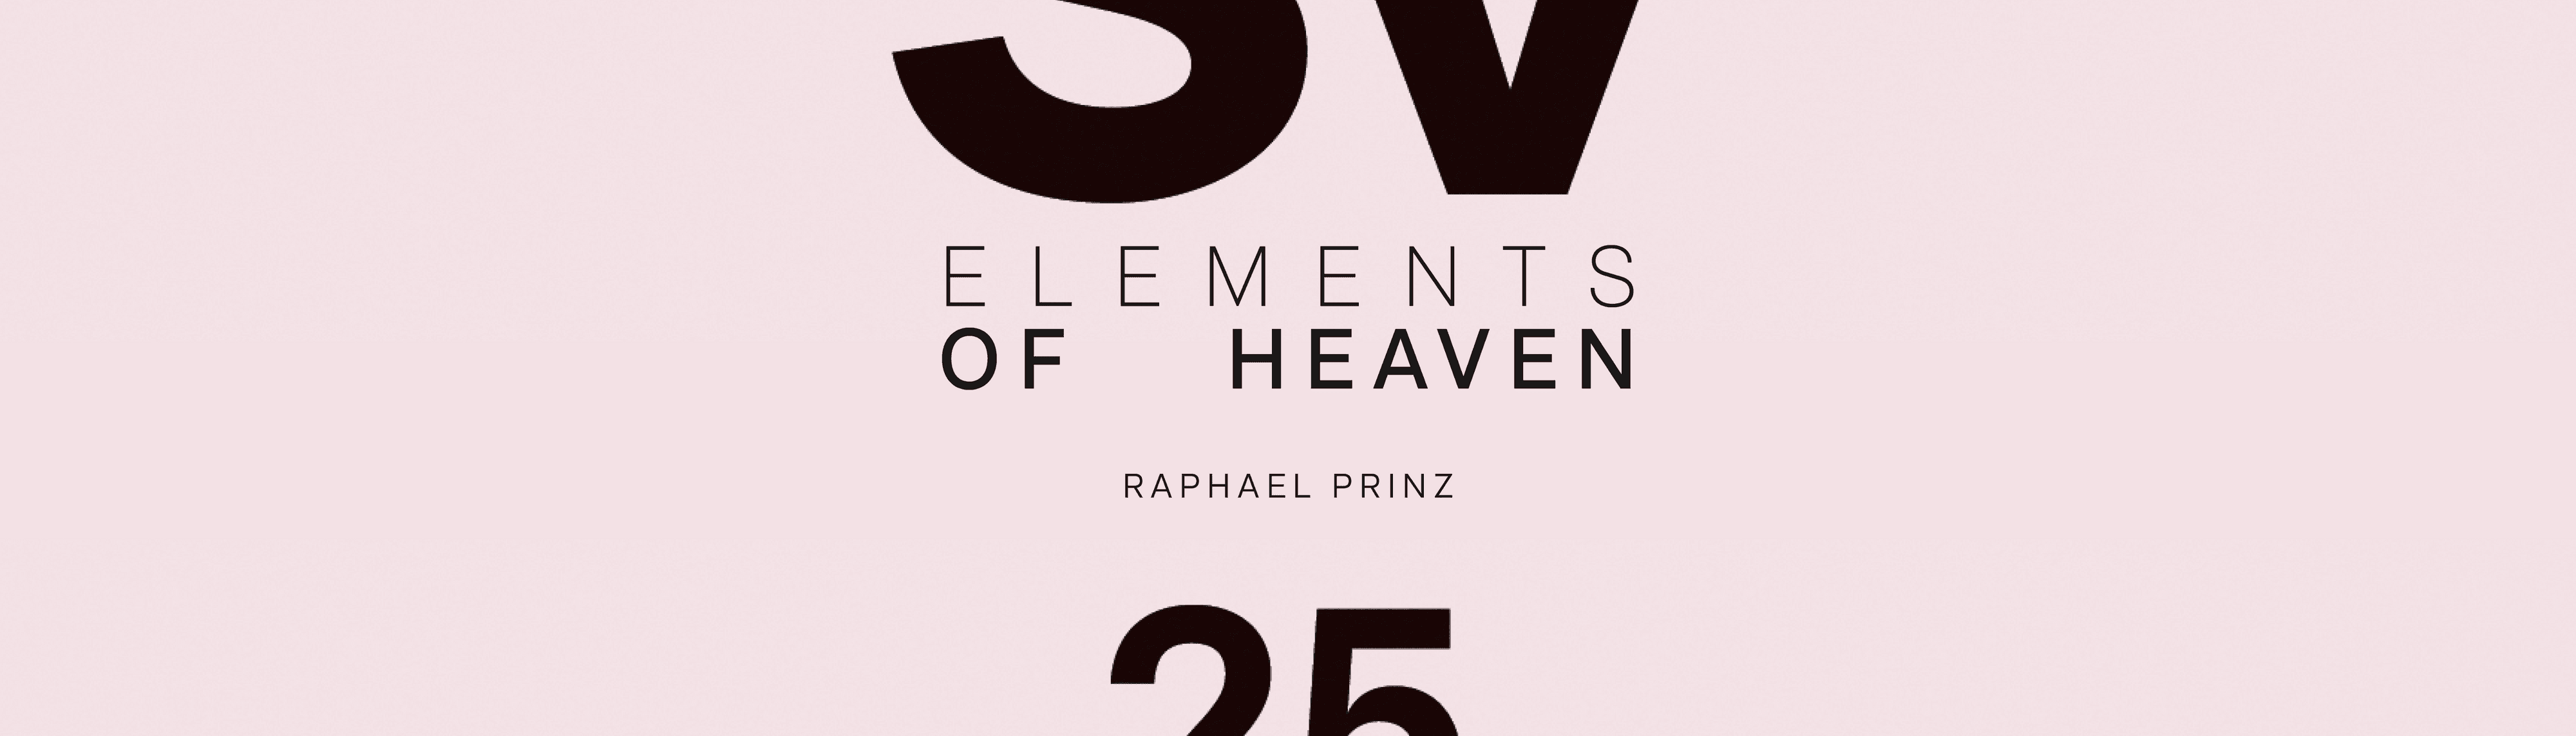 The Elements of Heaven